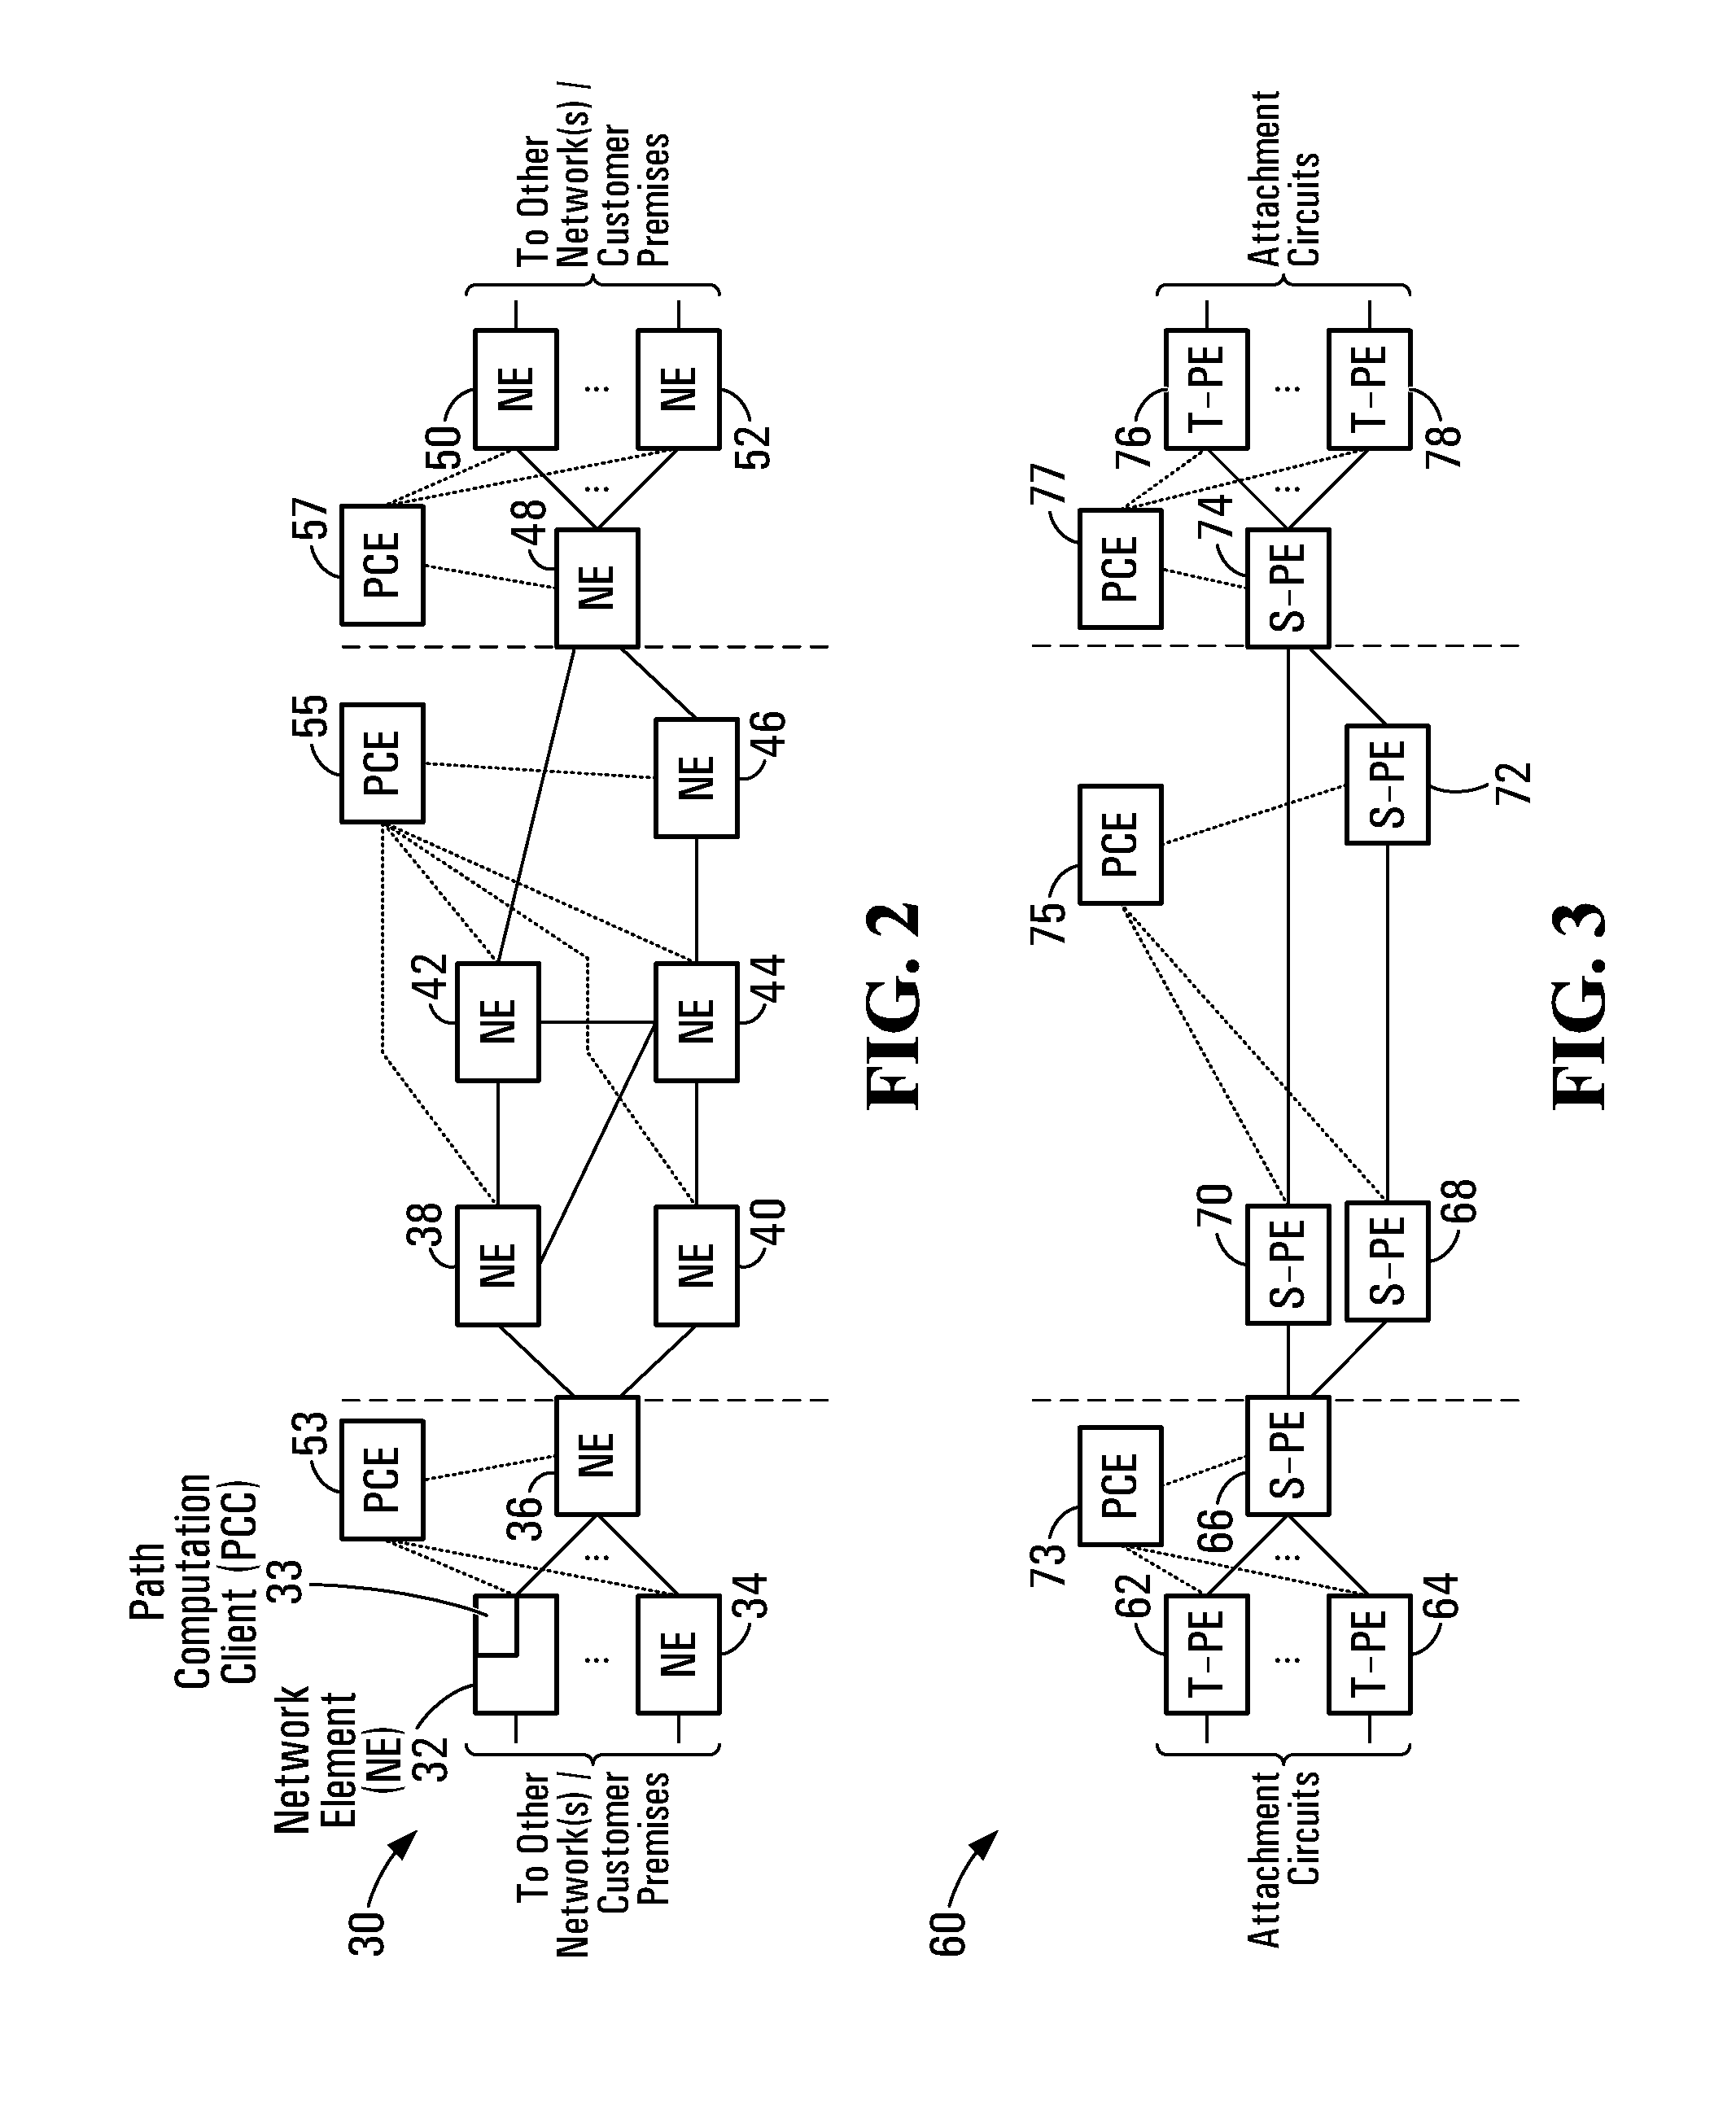 Virtual connection route selection apparatus and techniques